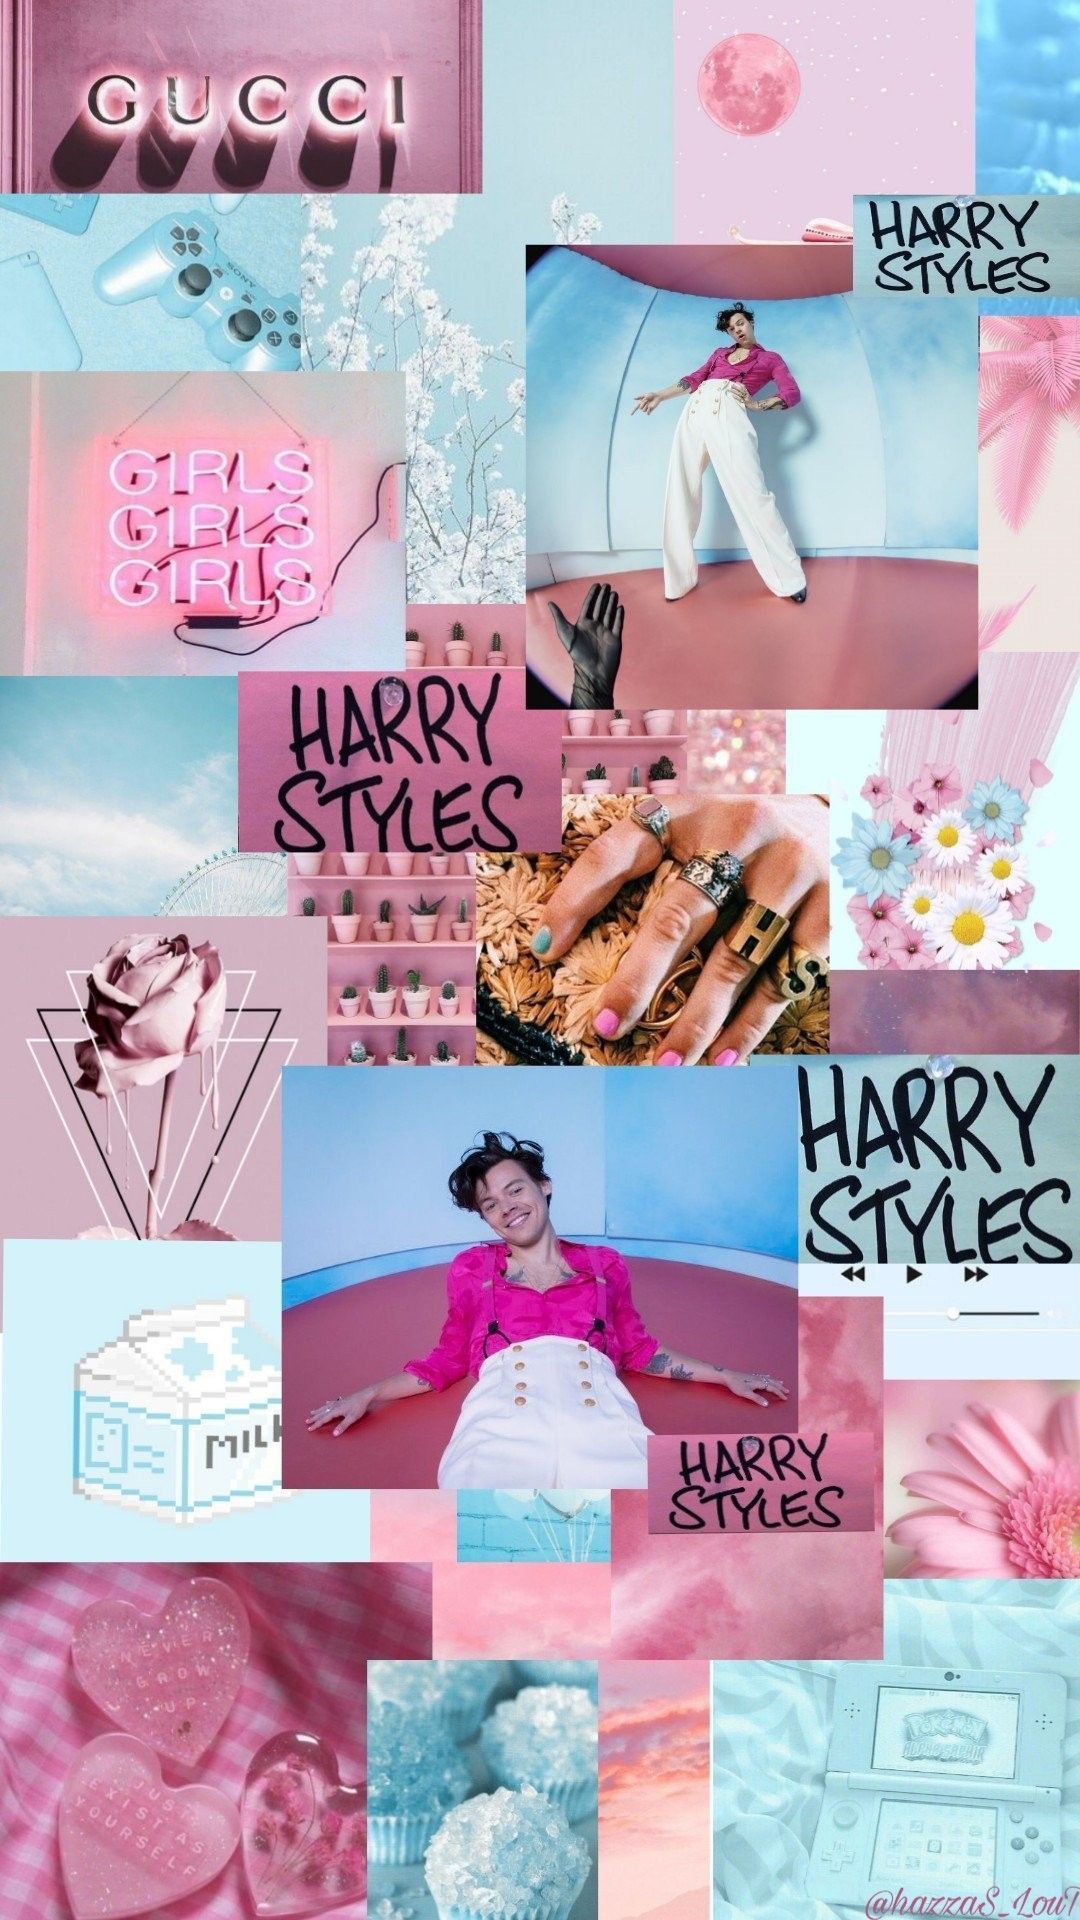 Harry styles aesthetic wallpaper for phone and desktop. - Harry Styles